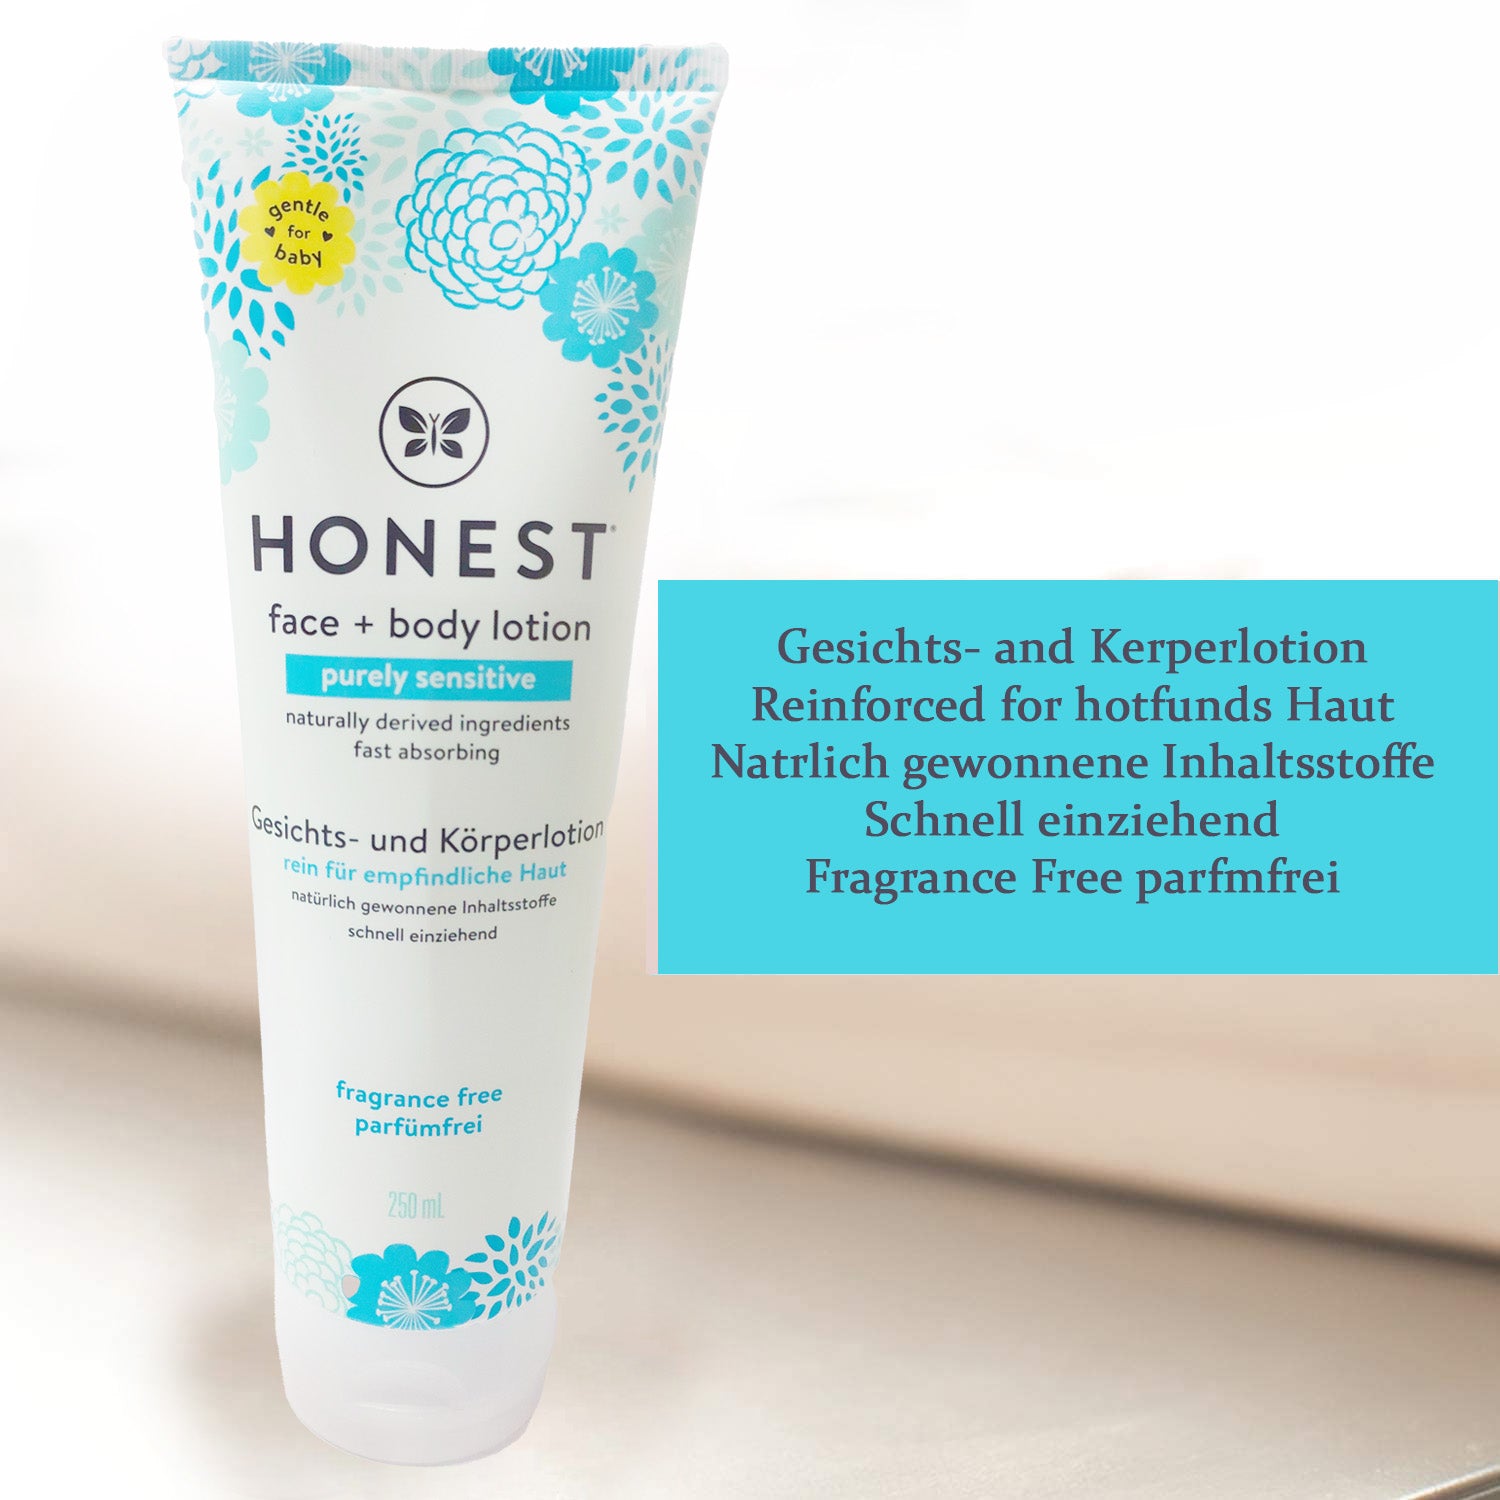 Honest Face + Body Lotion Purely Sensitive Fragrance Free 250ml Blue - Baby Moo